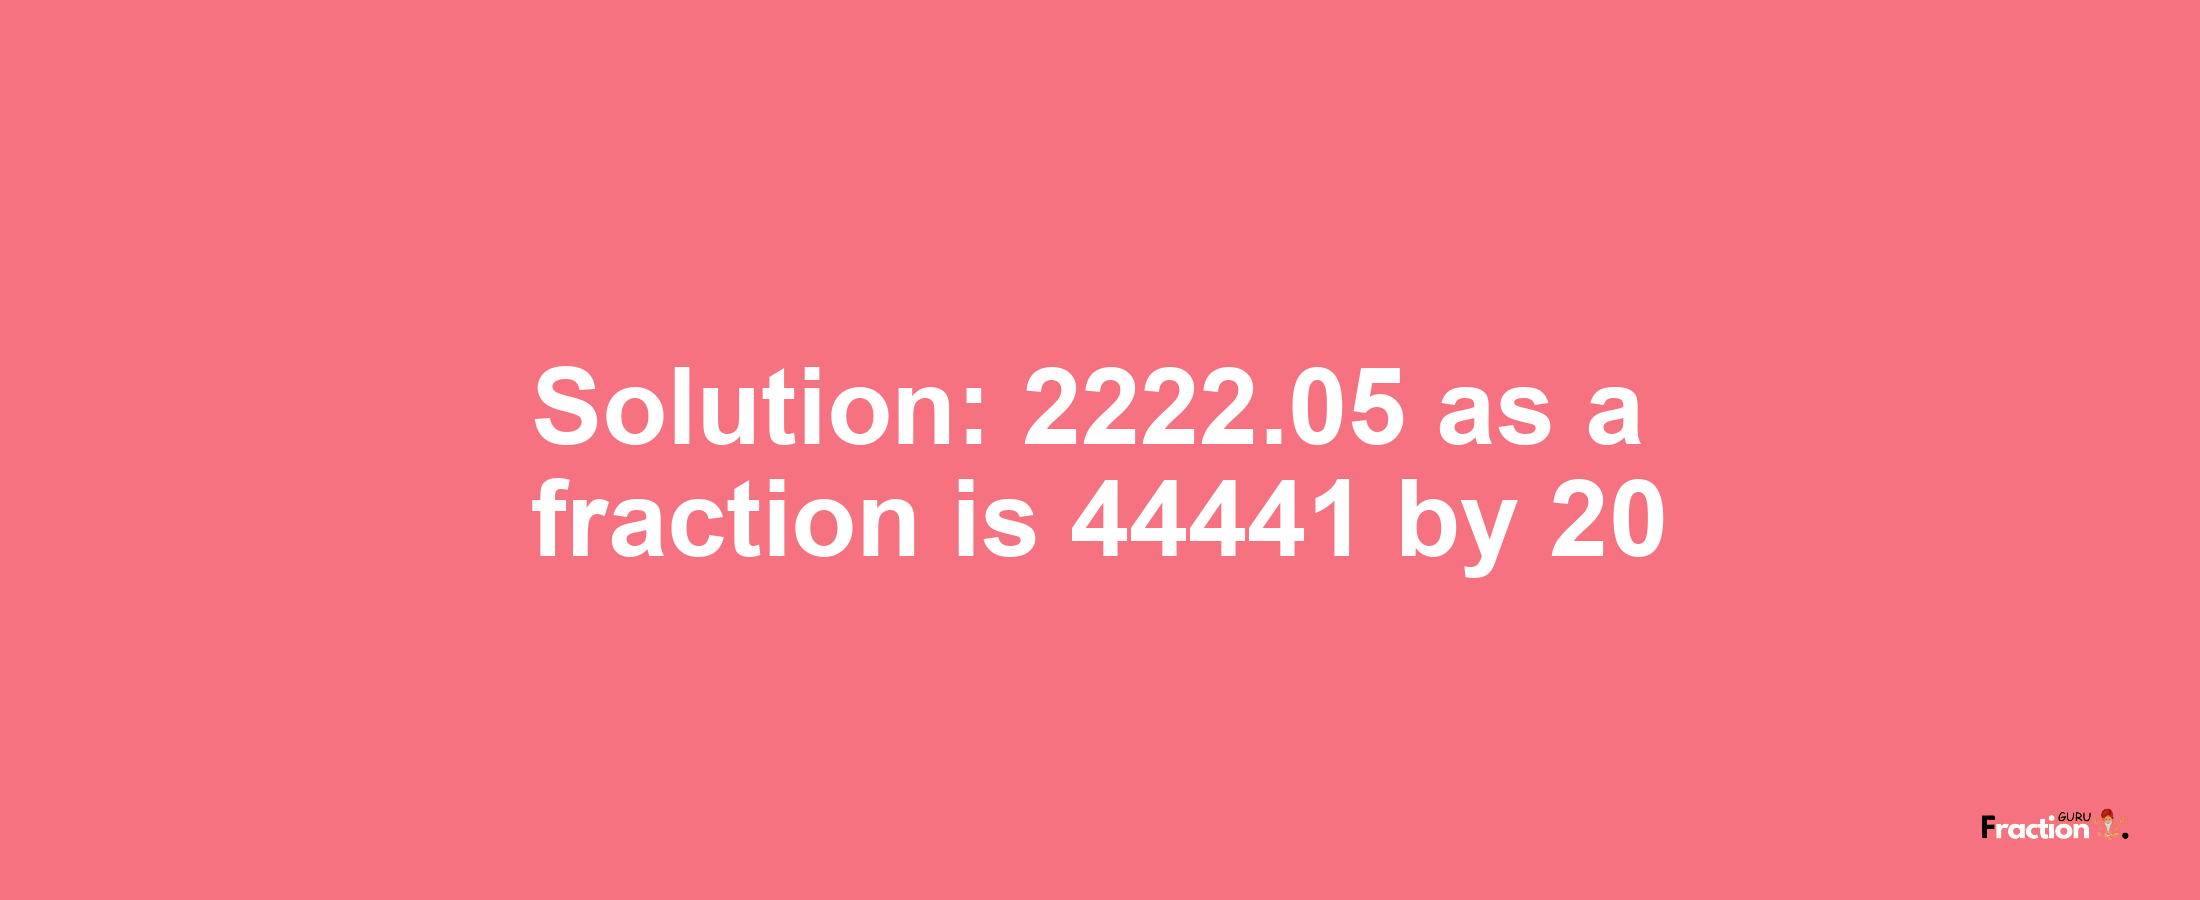 Solution:2222.05 as a fraction is 44441/20